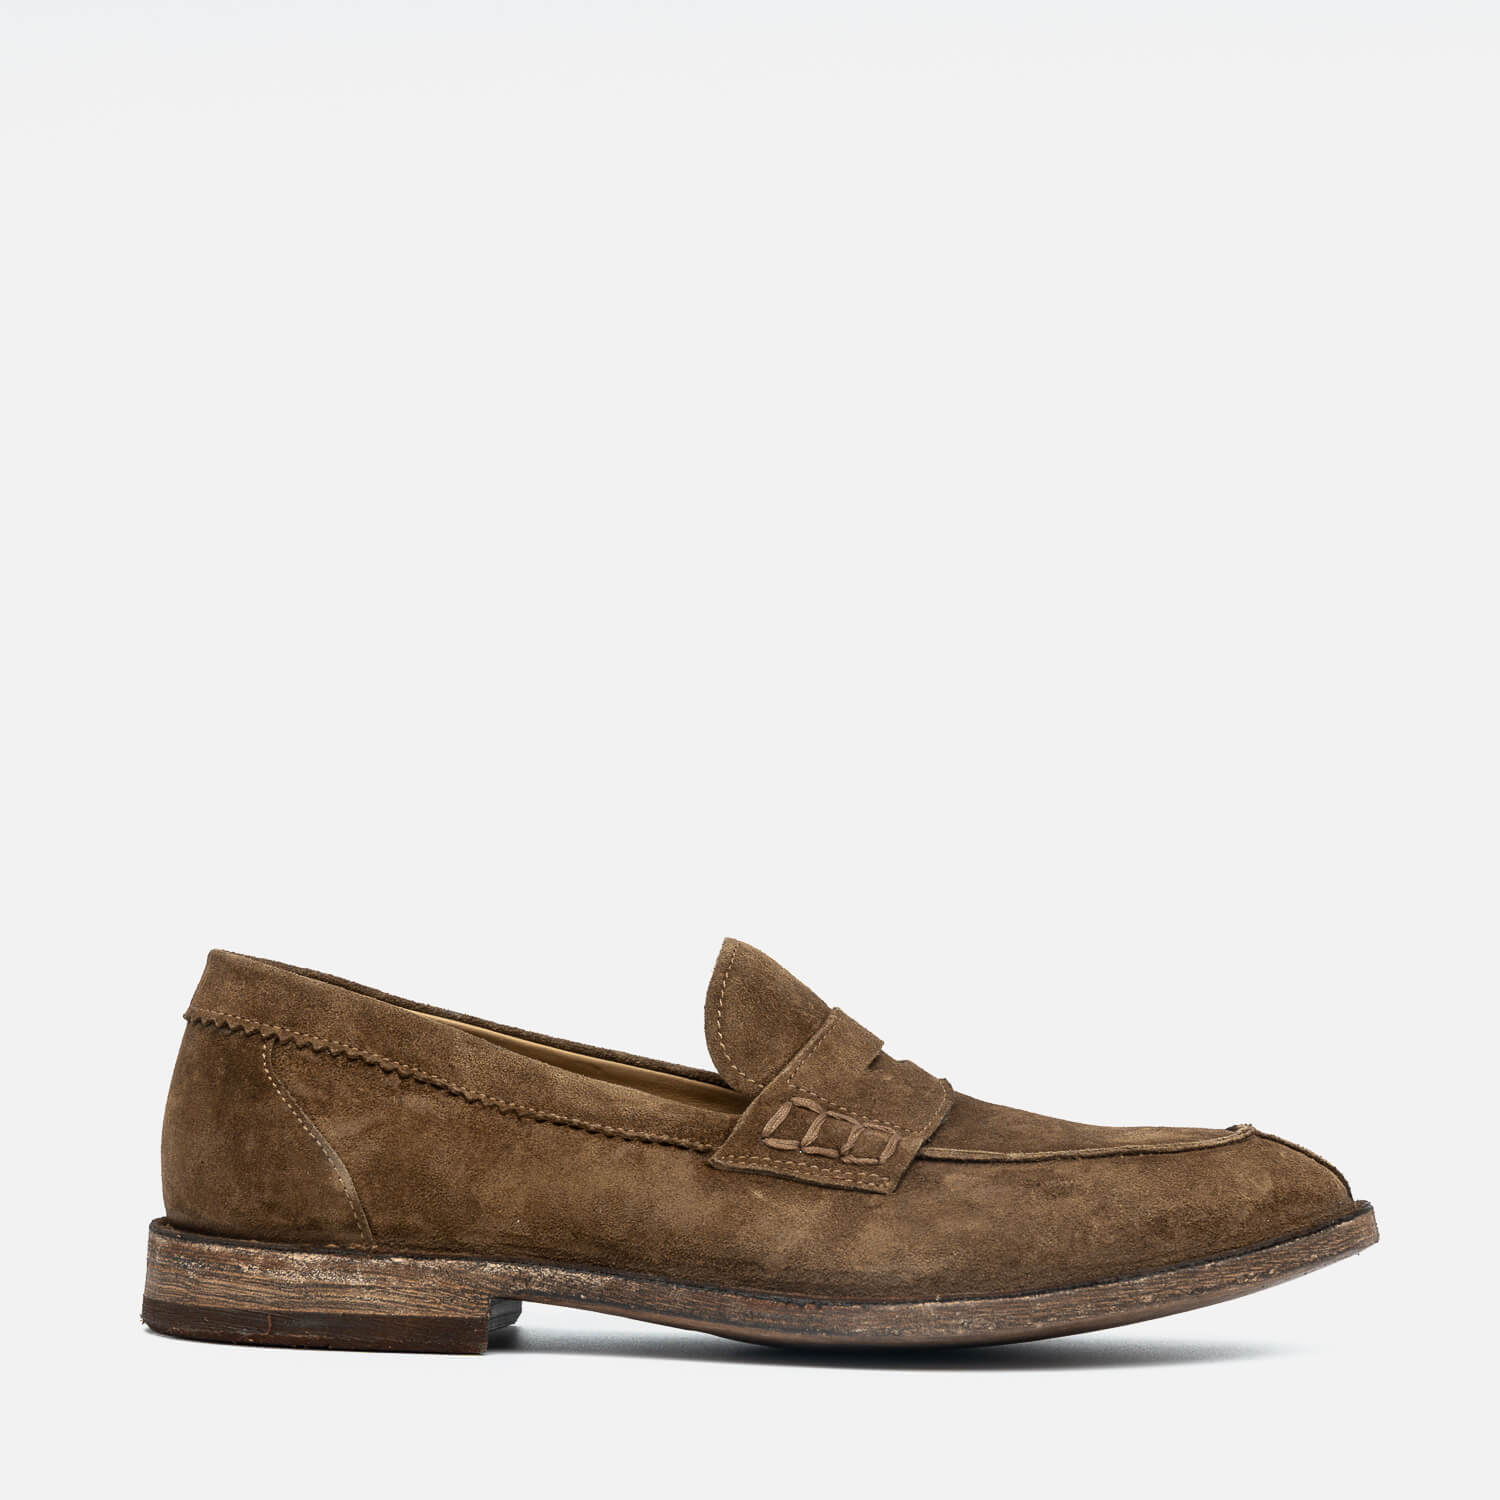 Biagio | Model 2718 moccasins beer-colored